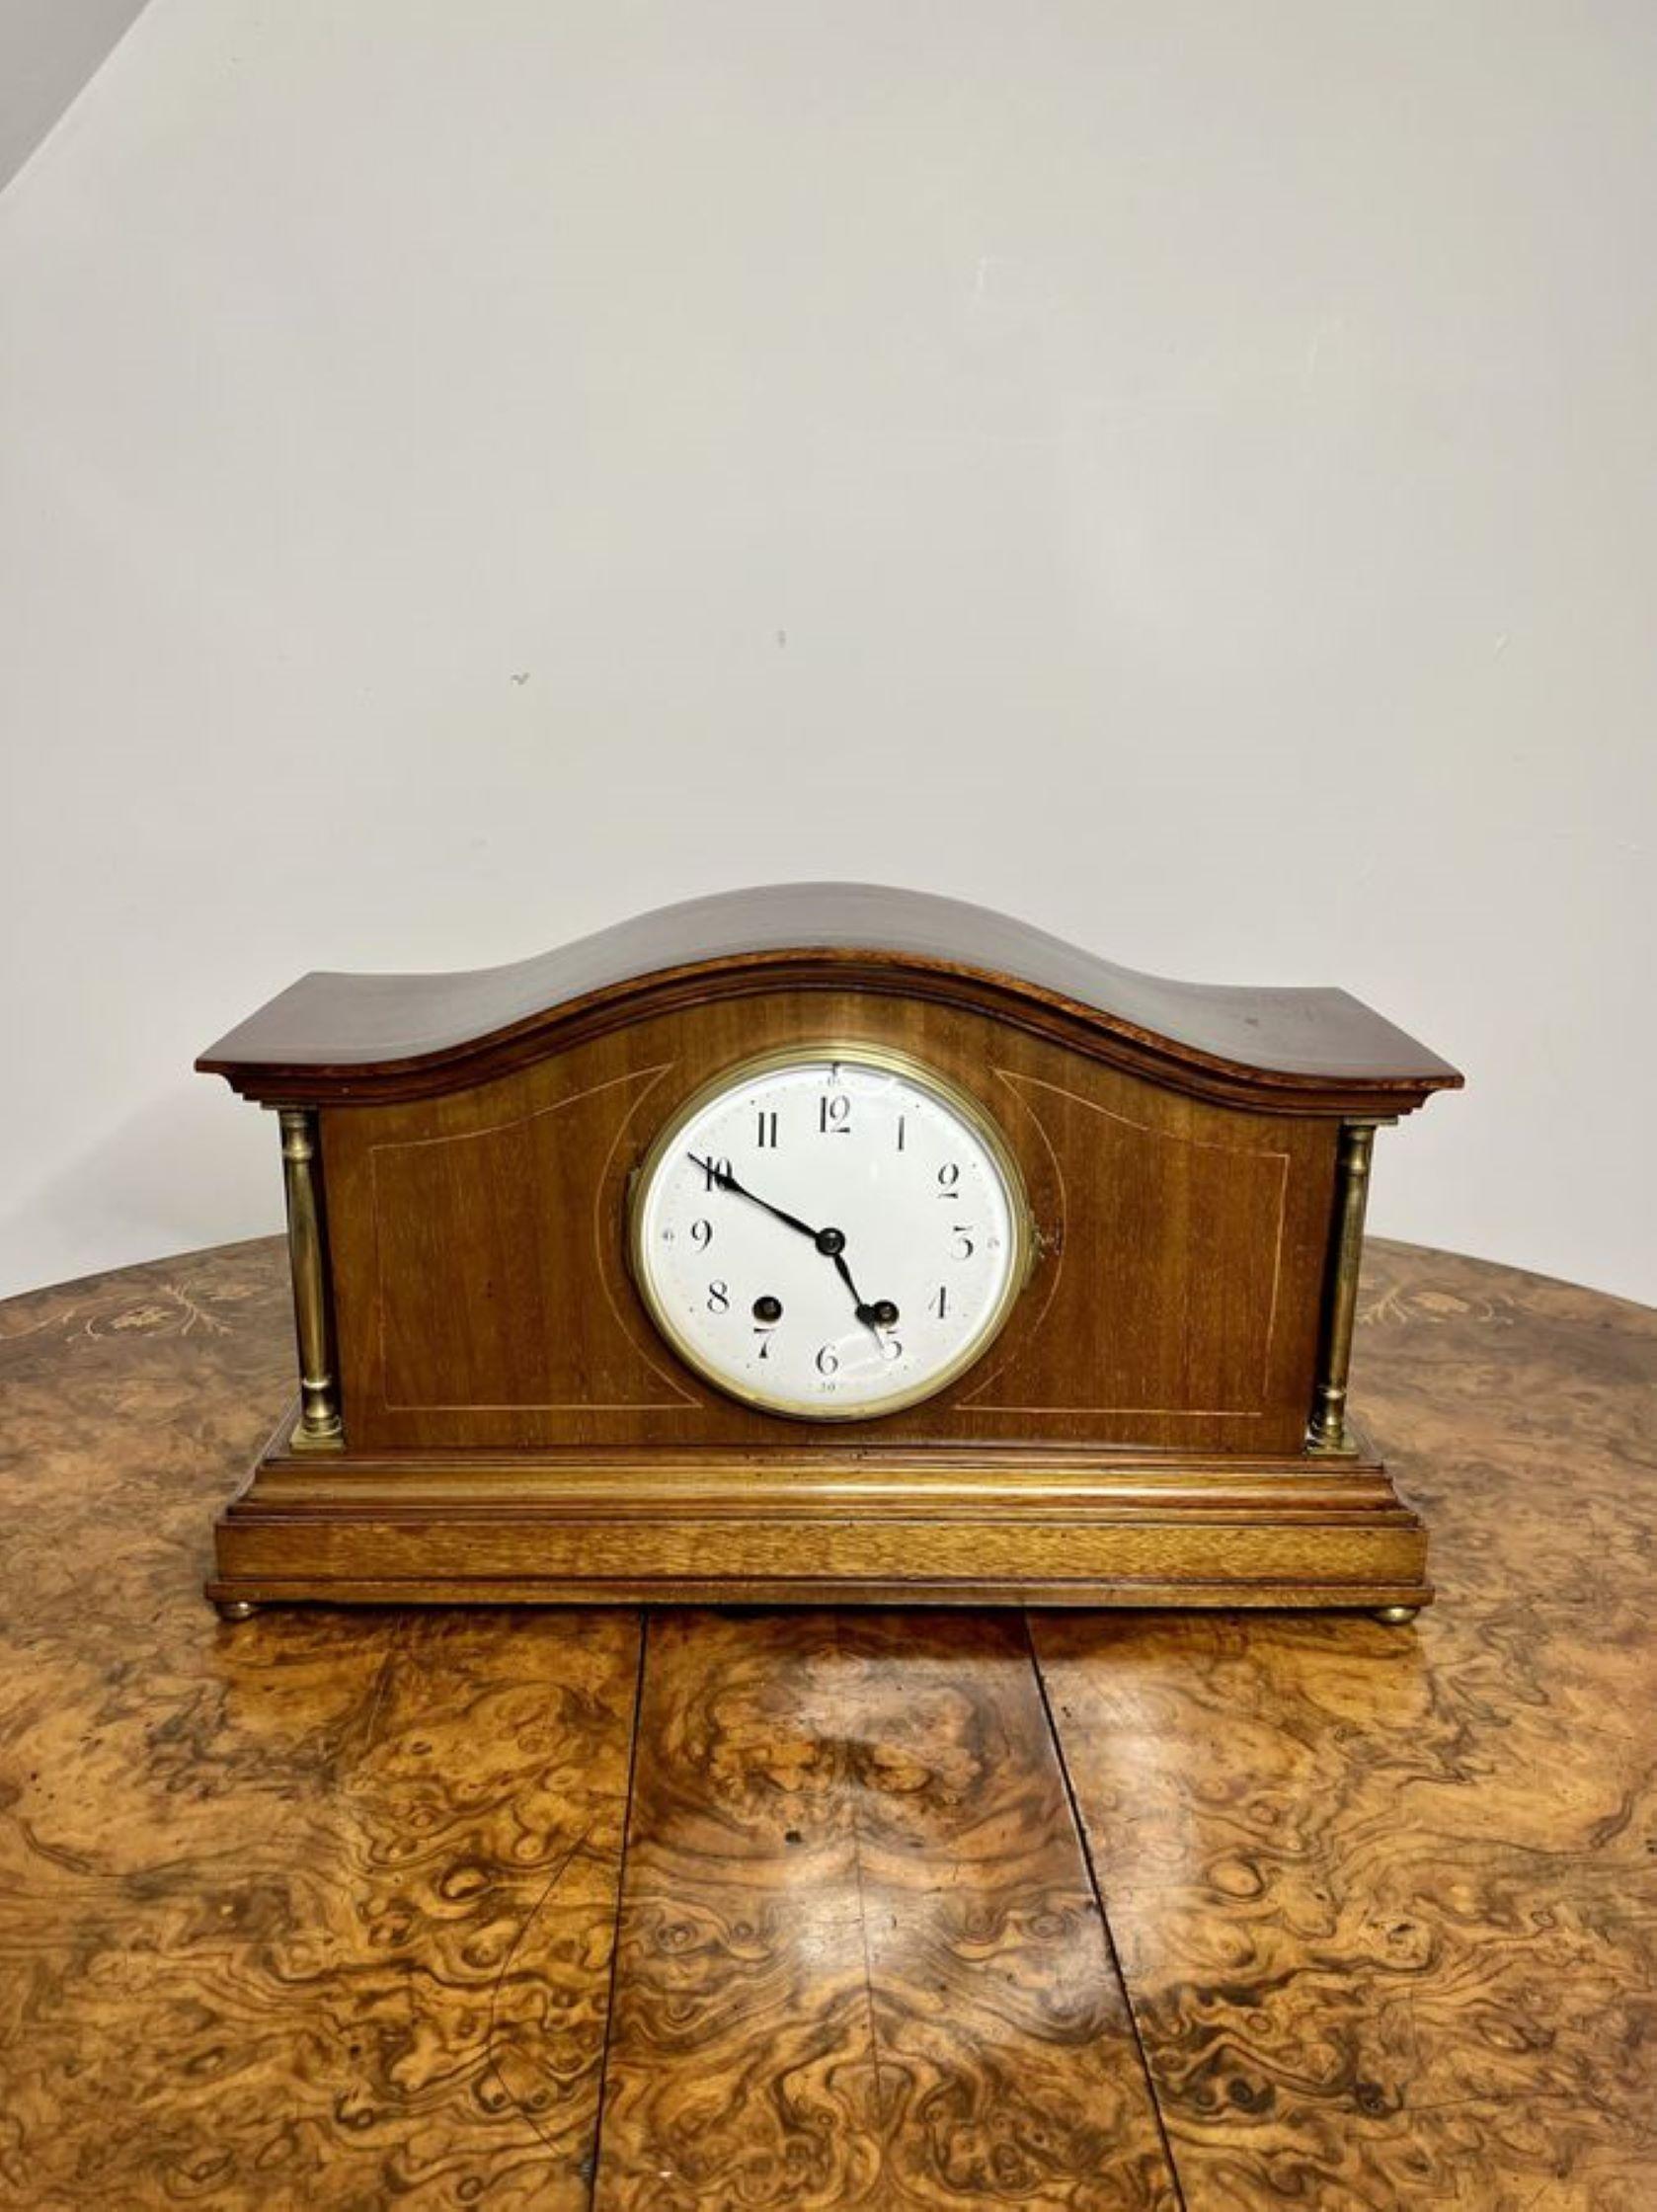 Quality antique Edwardian walnut mantle clock having a quality antique Edwardian walnut mantle clock having a white enamel dial with Arabic numerals and the original hands, a walnut case with brass columns raised on brass ball feet, having an eight